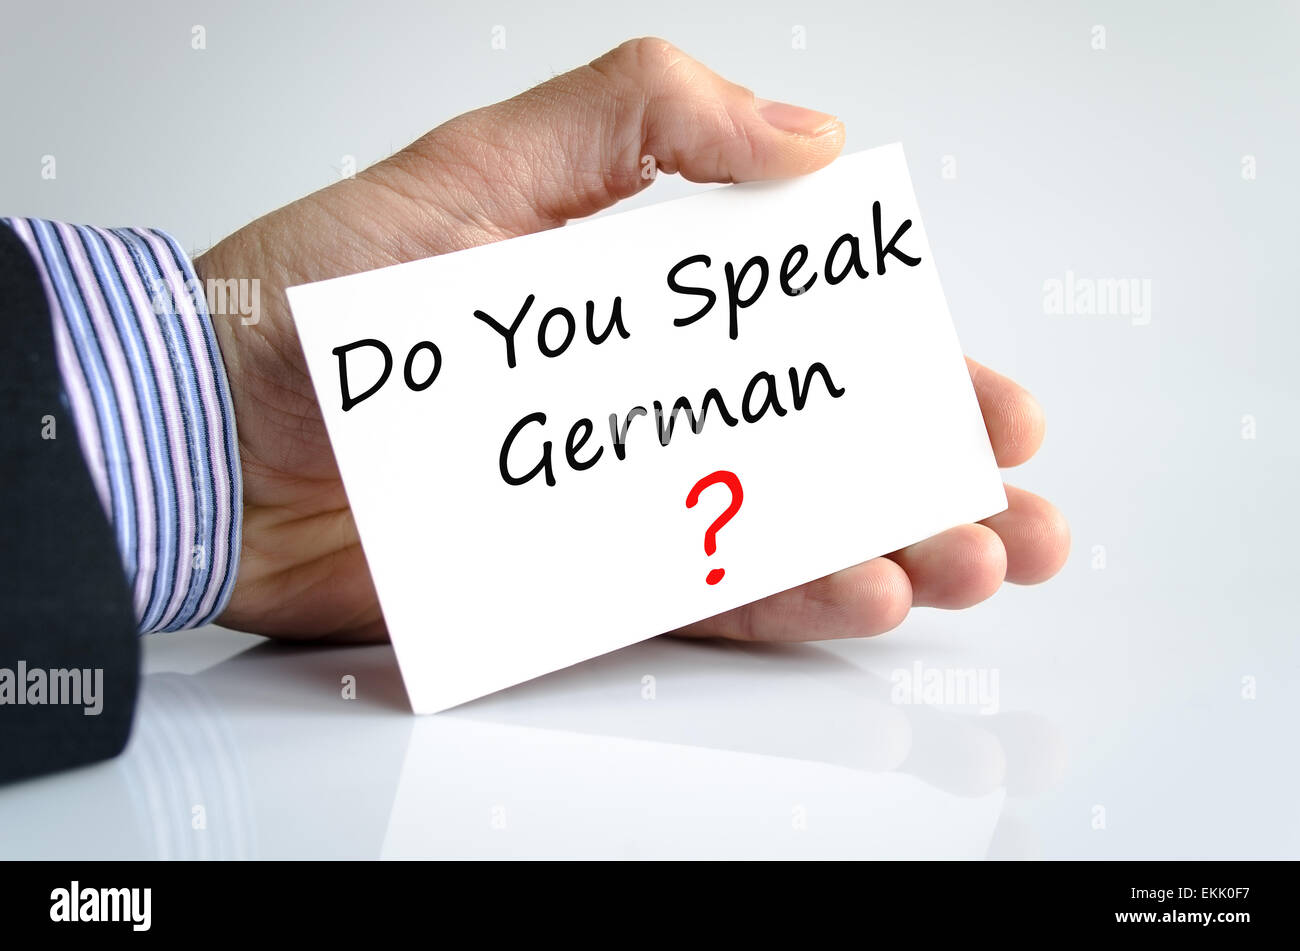 Do You Speak German Concept Isolated Over White Background Stock Photo